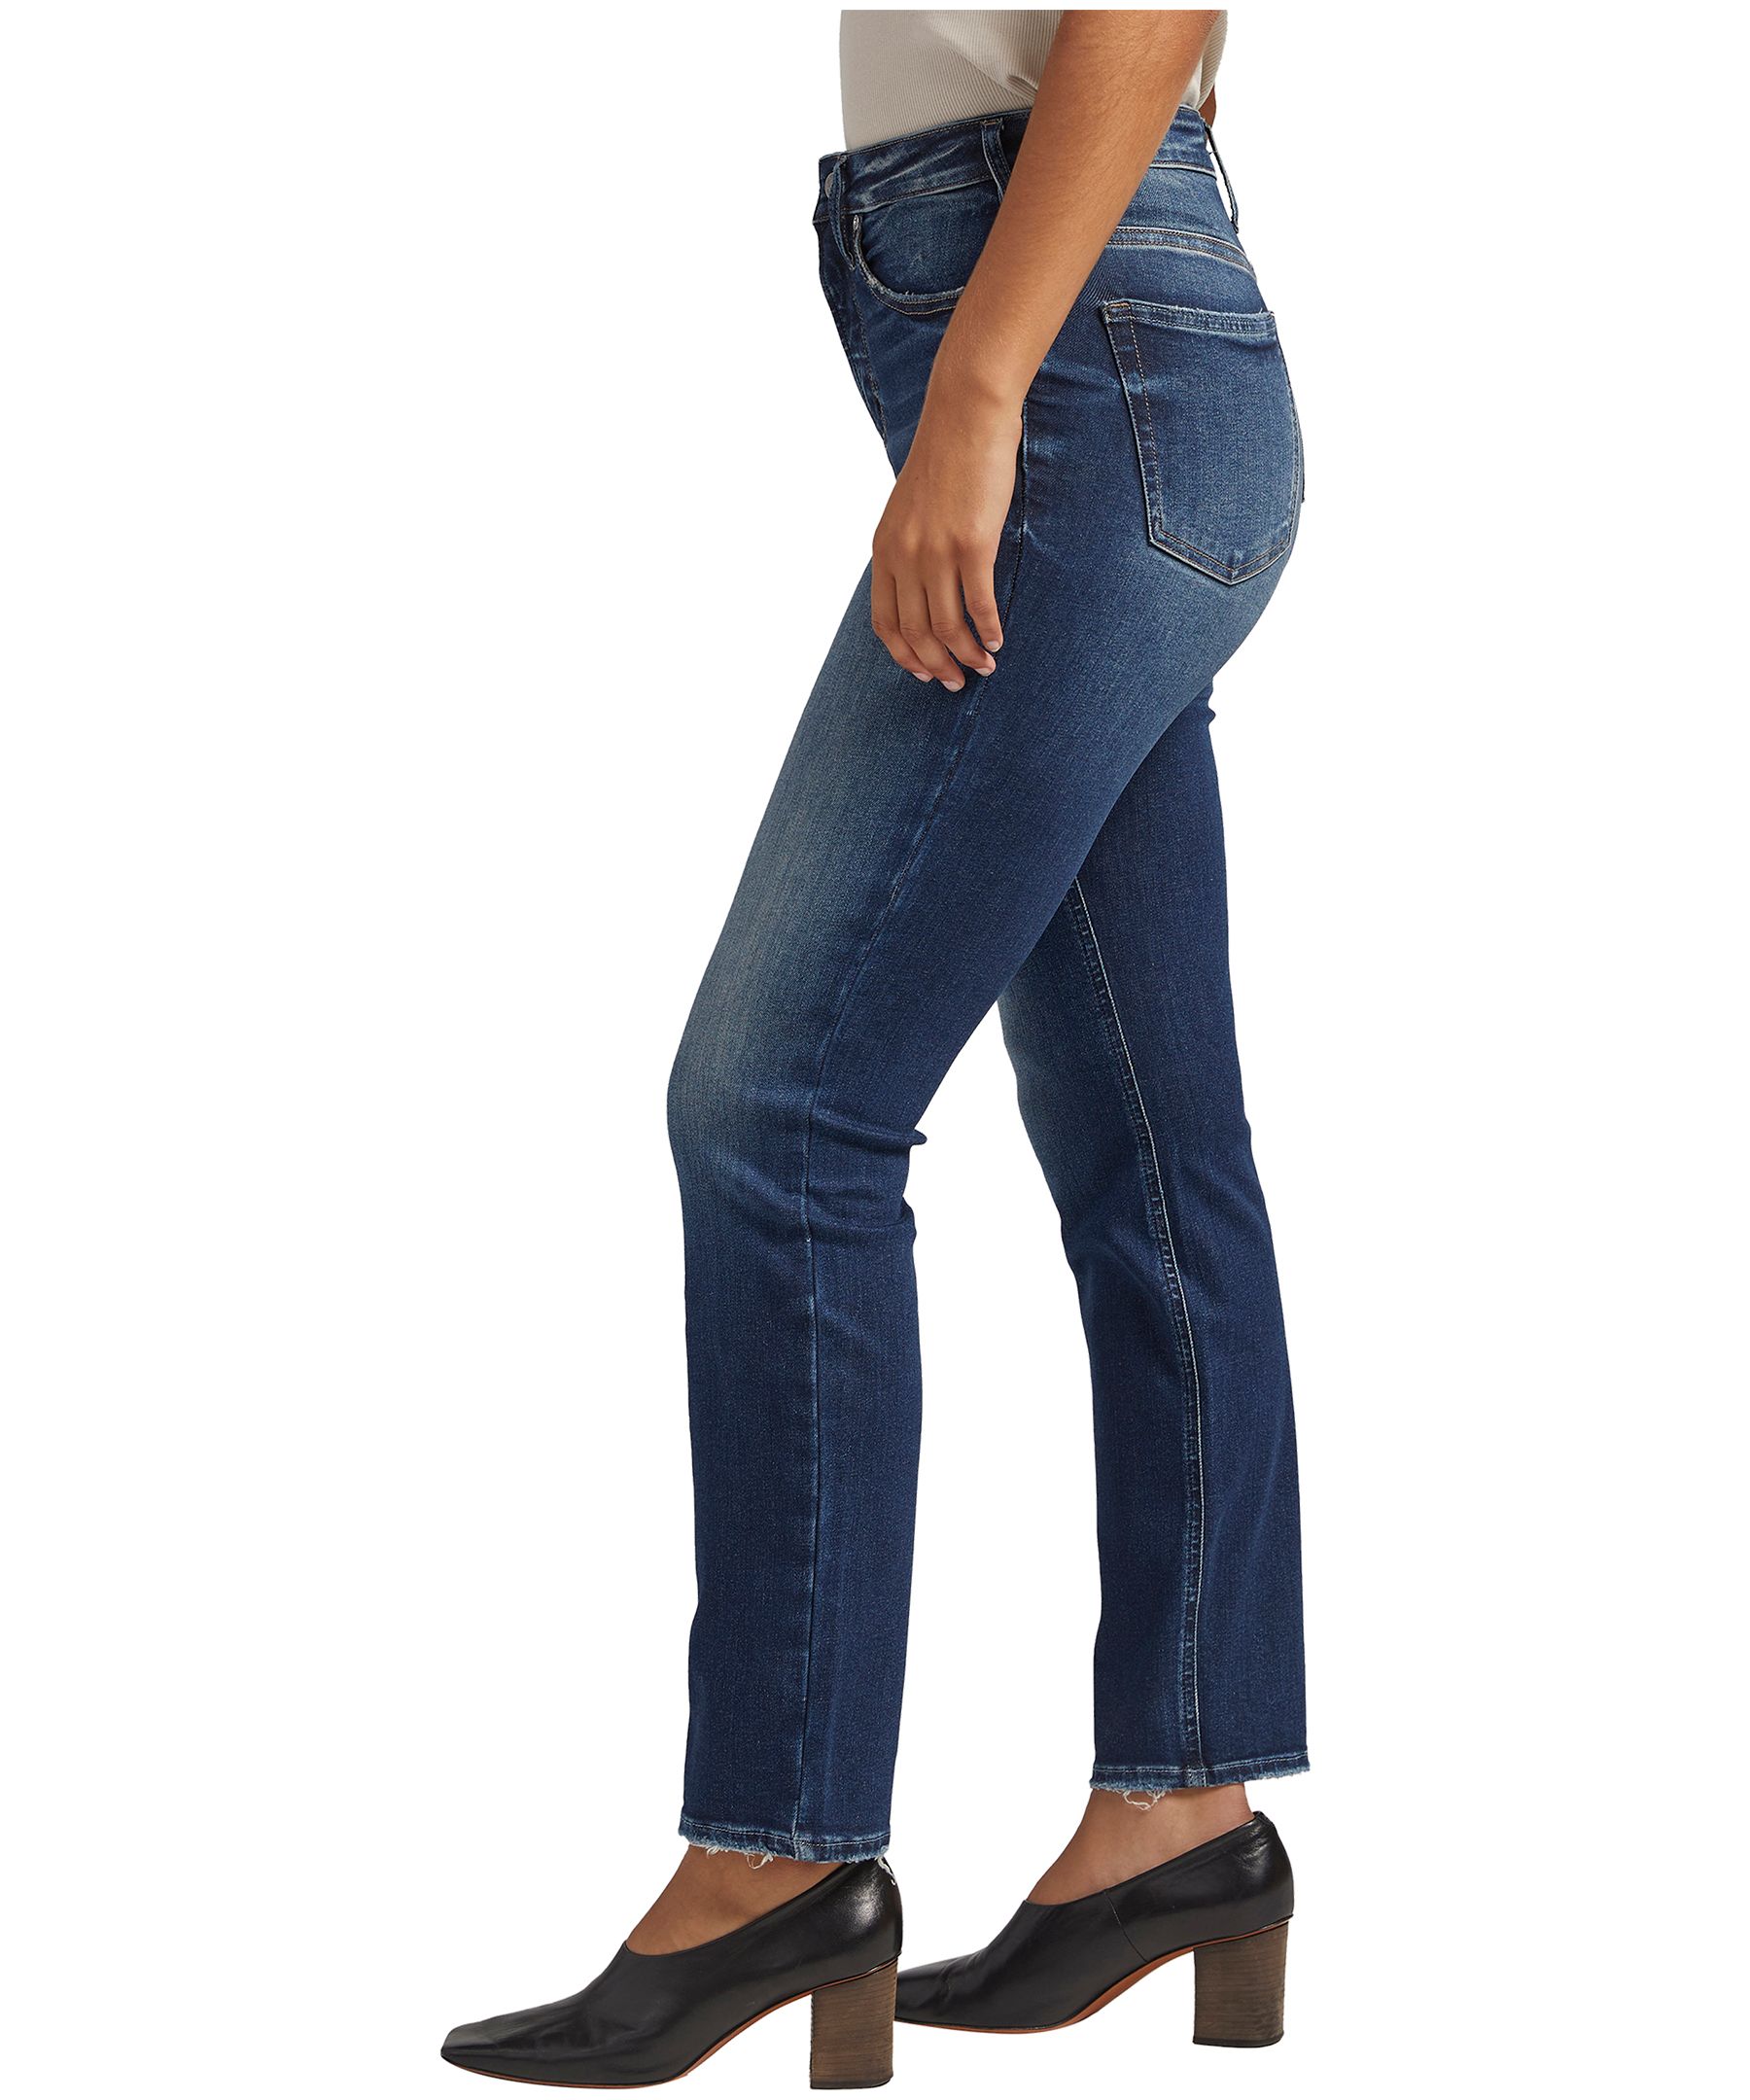 Buy Infinite Fit High Rise Skinny Jeans for CAD 88.00